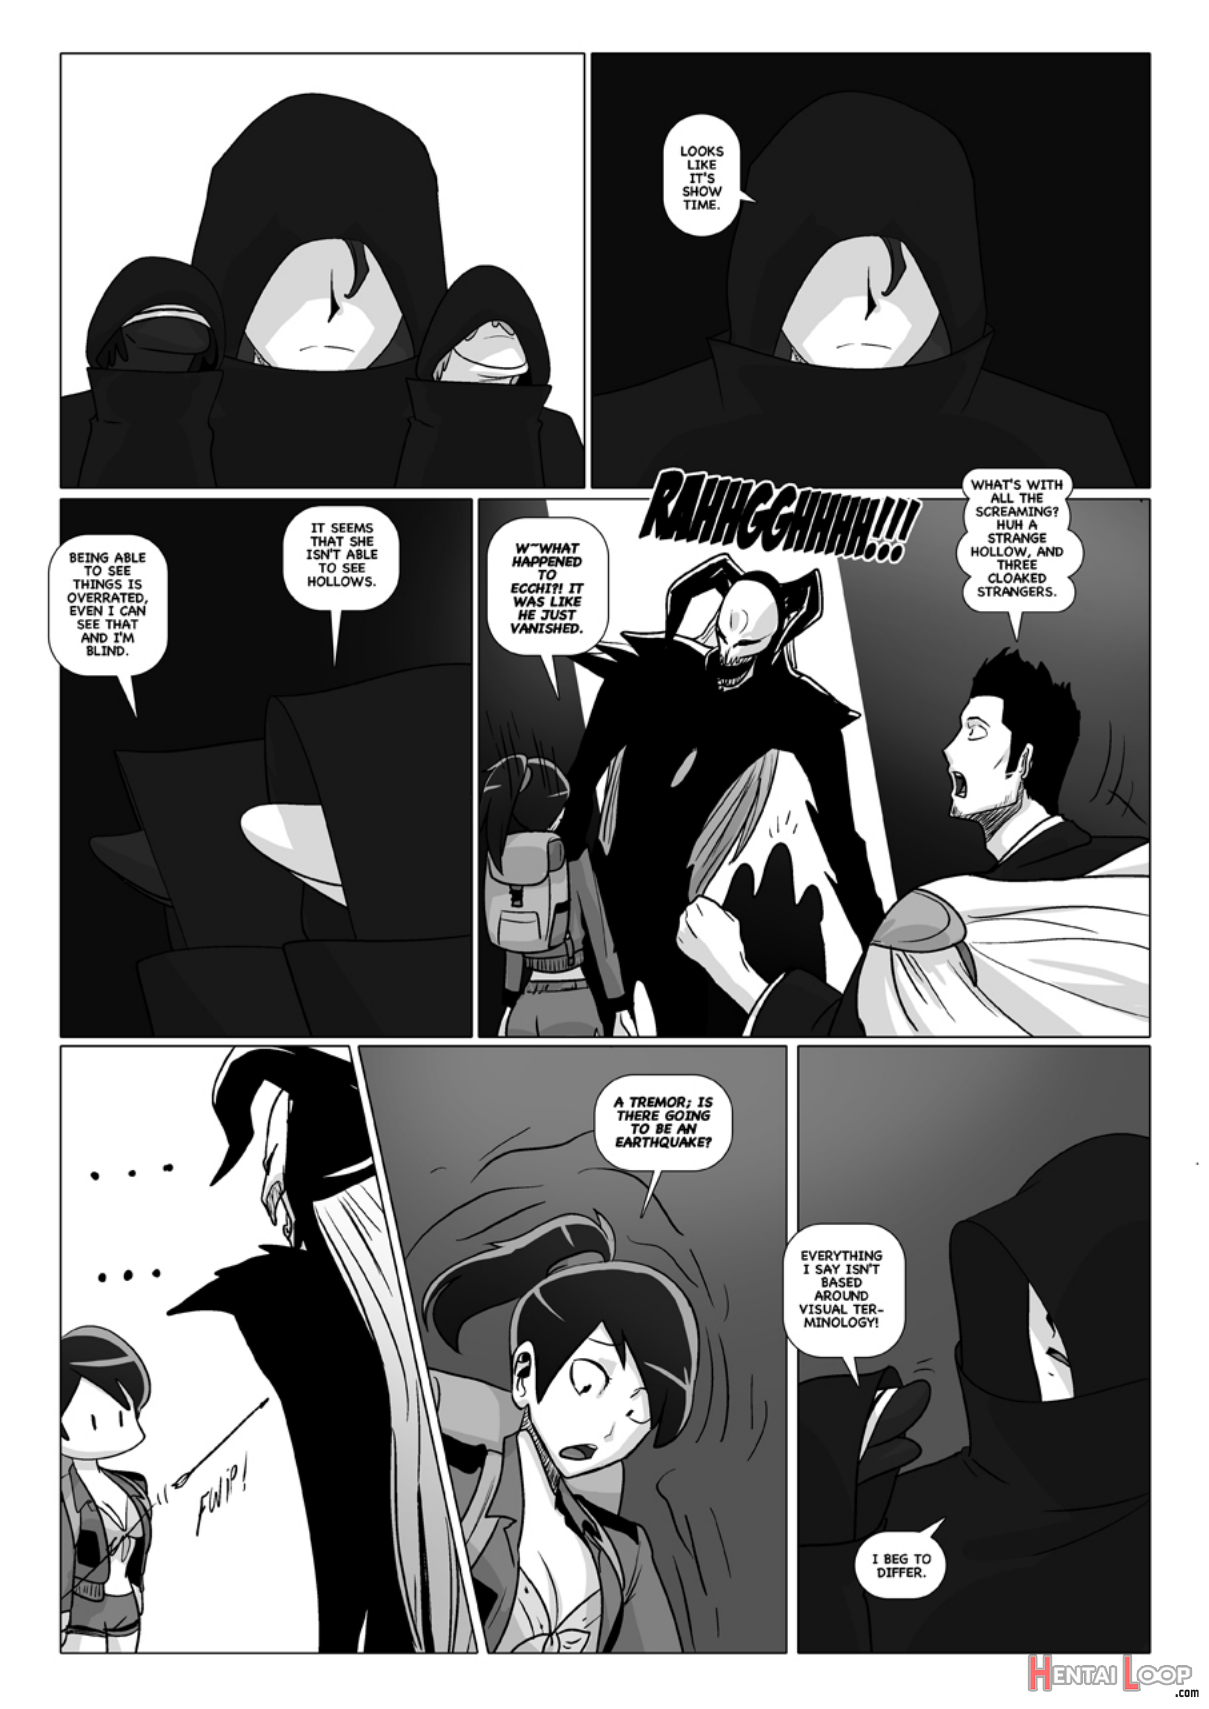 Happy To Serve You - Xxx Version page 458